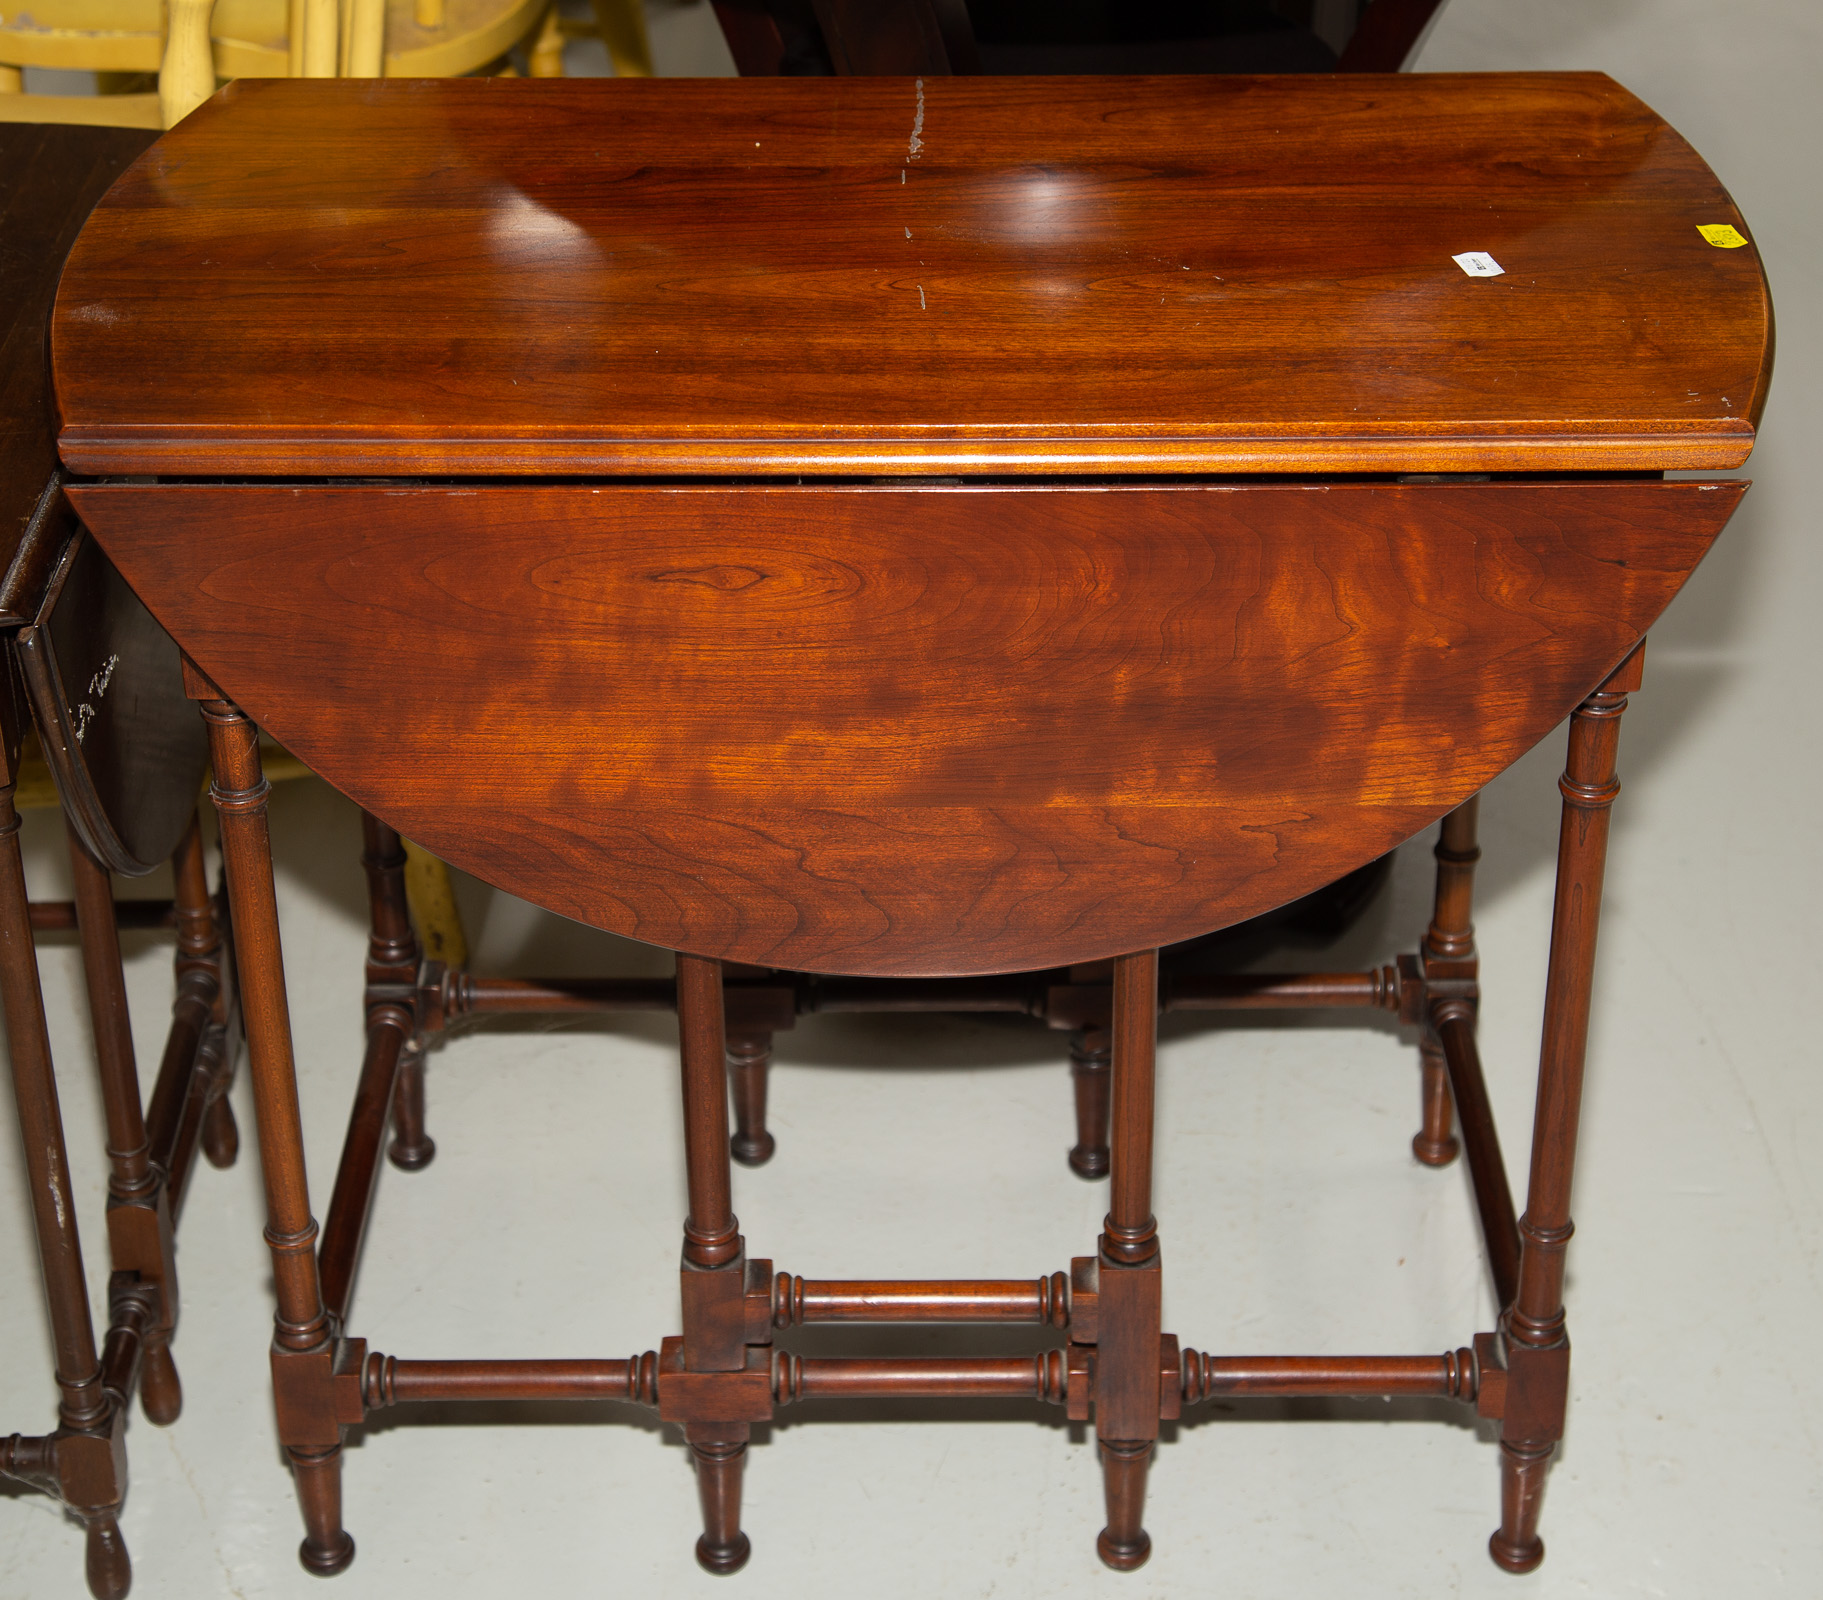 SMALL CHERRY DROP LEAF TABLE 3rd